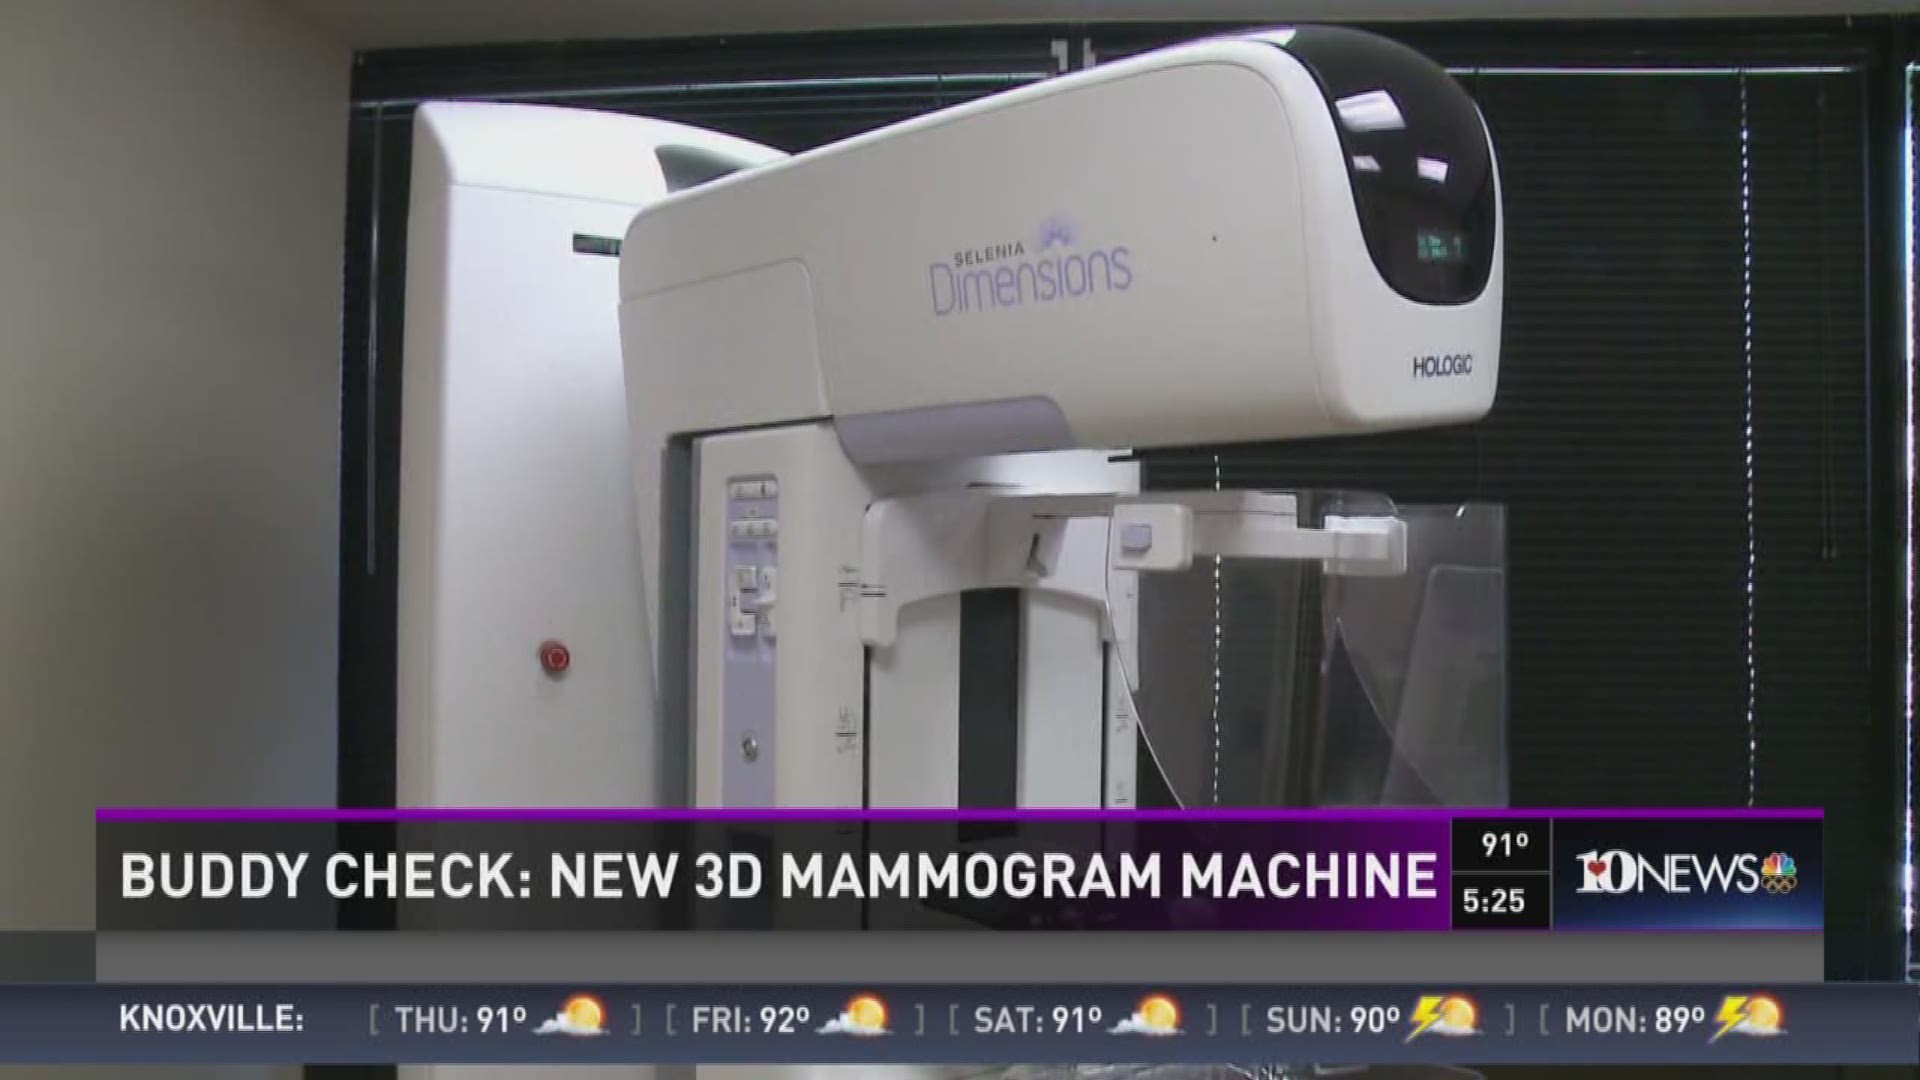 A new 3D mammogram machine at Tennova may help with early detection by taking more images and increasing image quality during each exam. August 10, 2016.